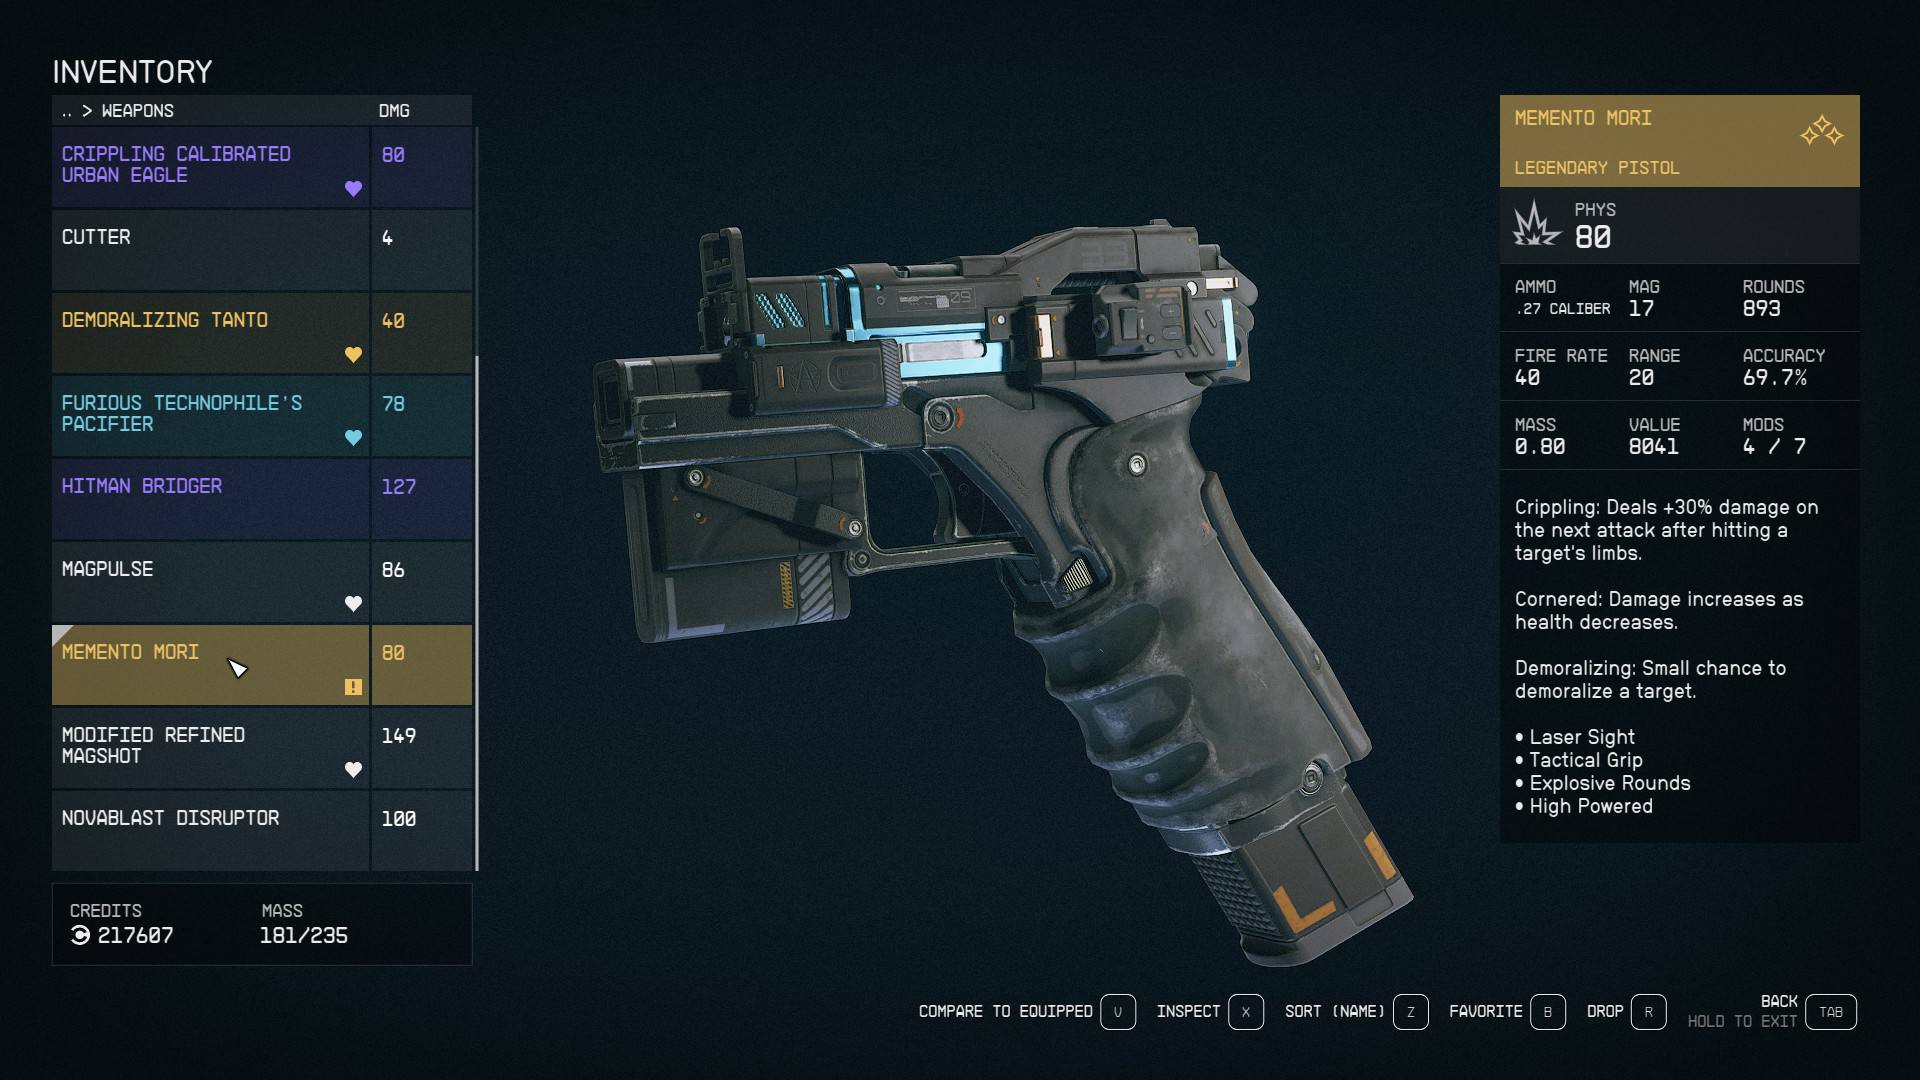 Starfield Burden of Proof evidence locations: The Memento Mori Legendary Pistol in the player's inventory.